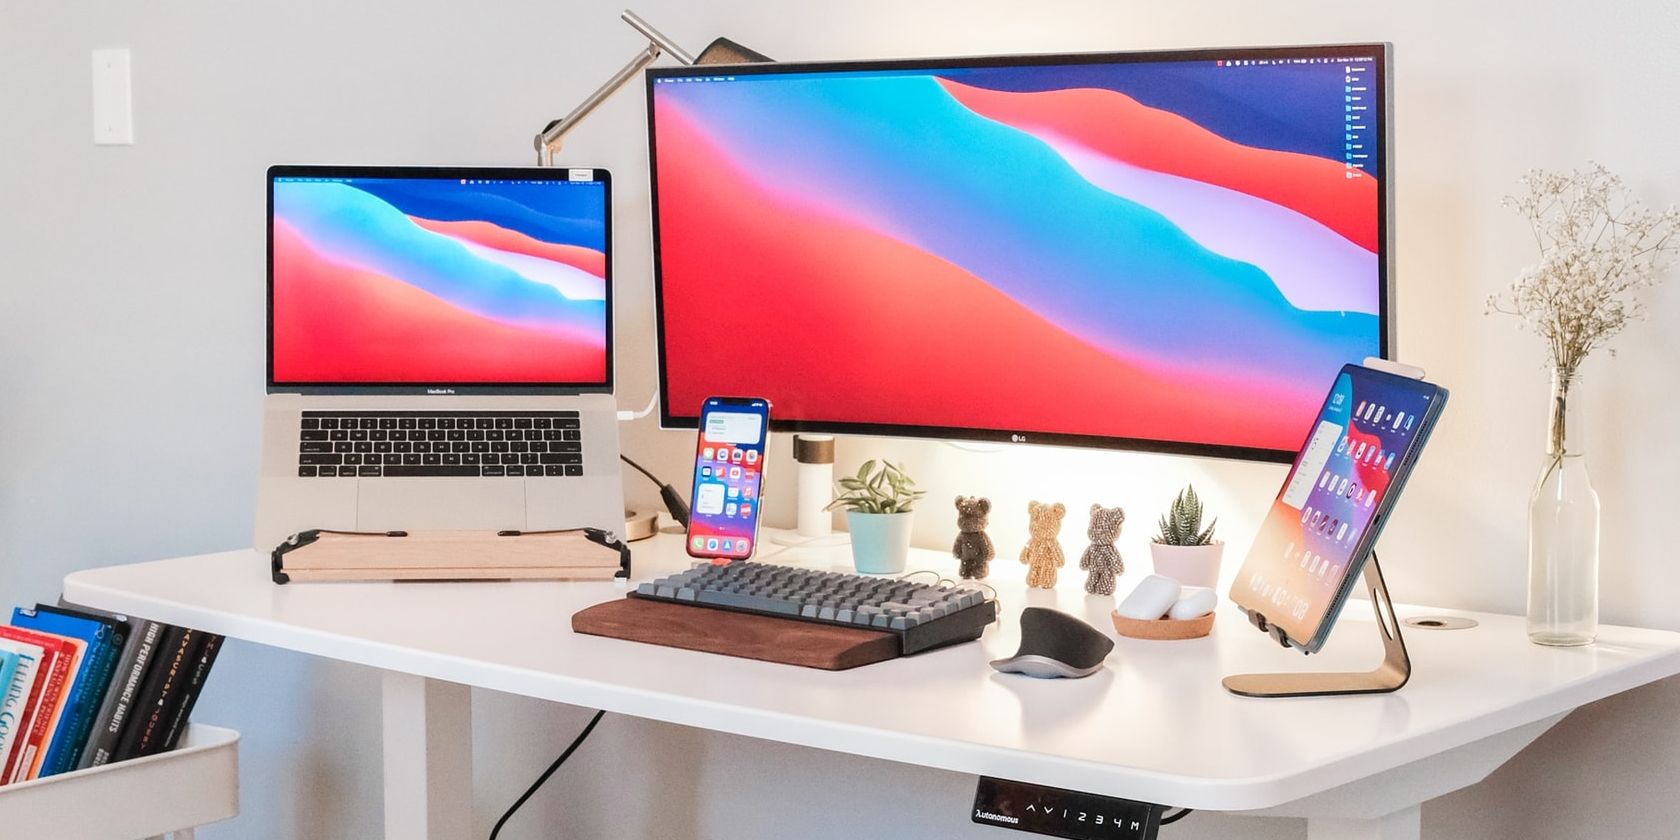 4 Tips to Make Your Mac as Comfortable to Use as Possible